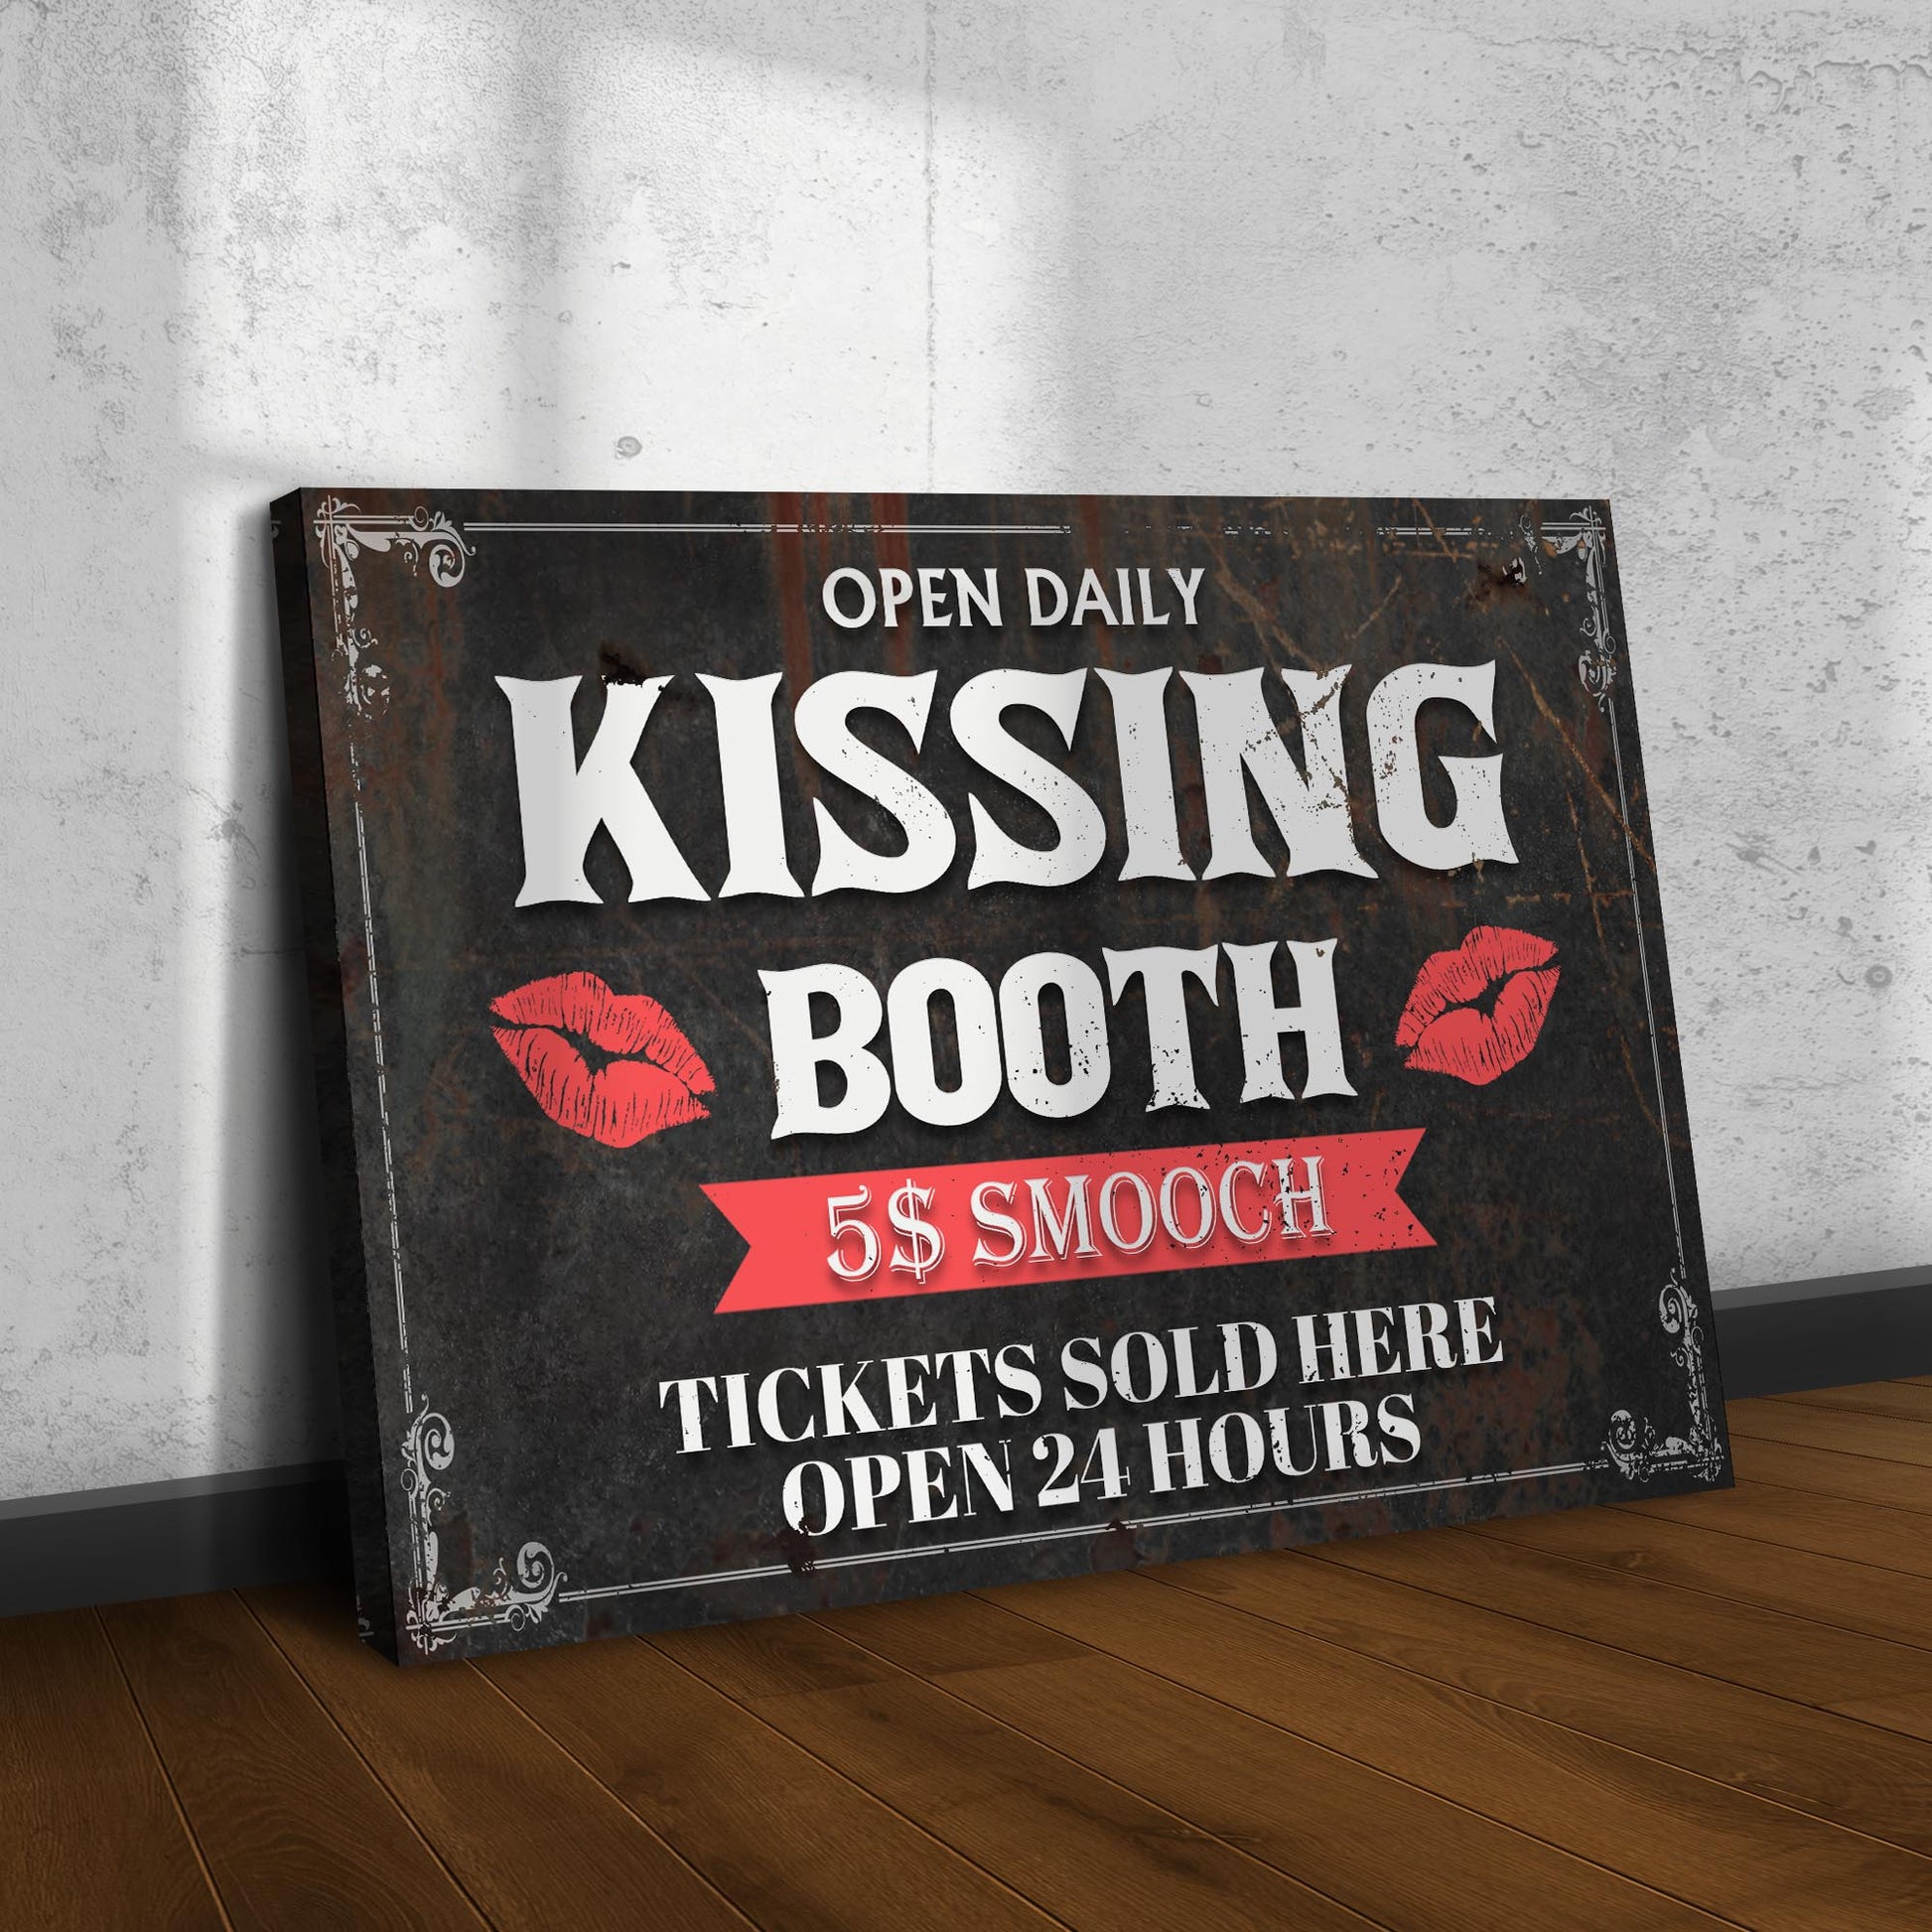 Tickets Sold Here Kissing Booth Sign  - Image by Tailored Canvases